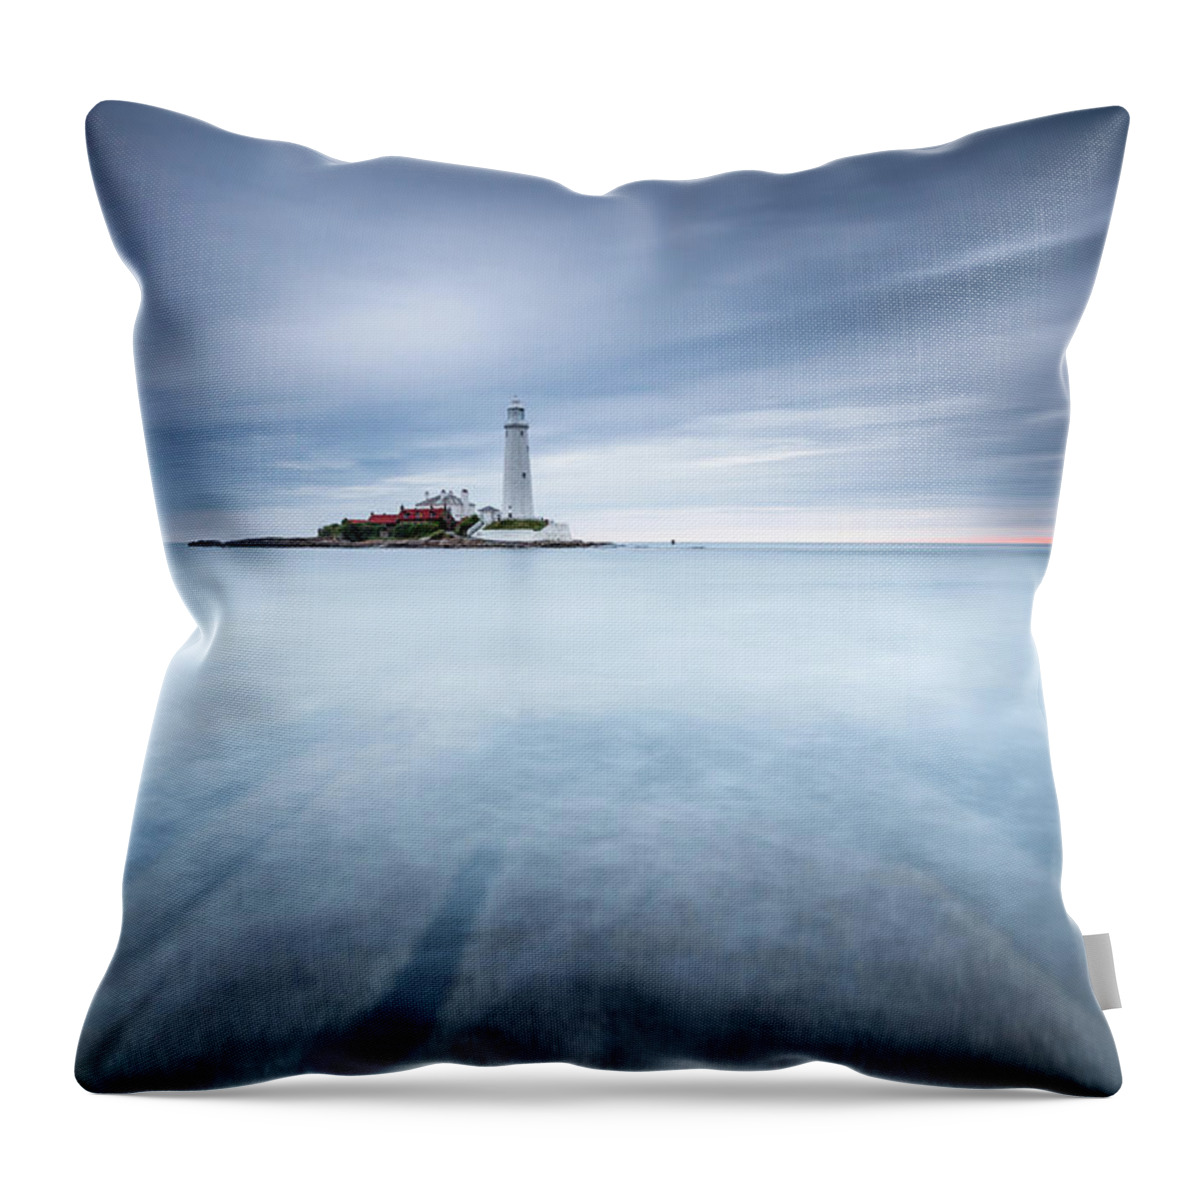 St Mary's Lighthouse Throw Pillow featuring the photograph Sliver - St Mary's Lighthouse by Anita Nicholson